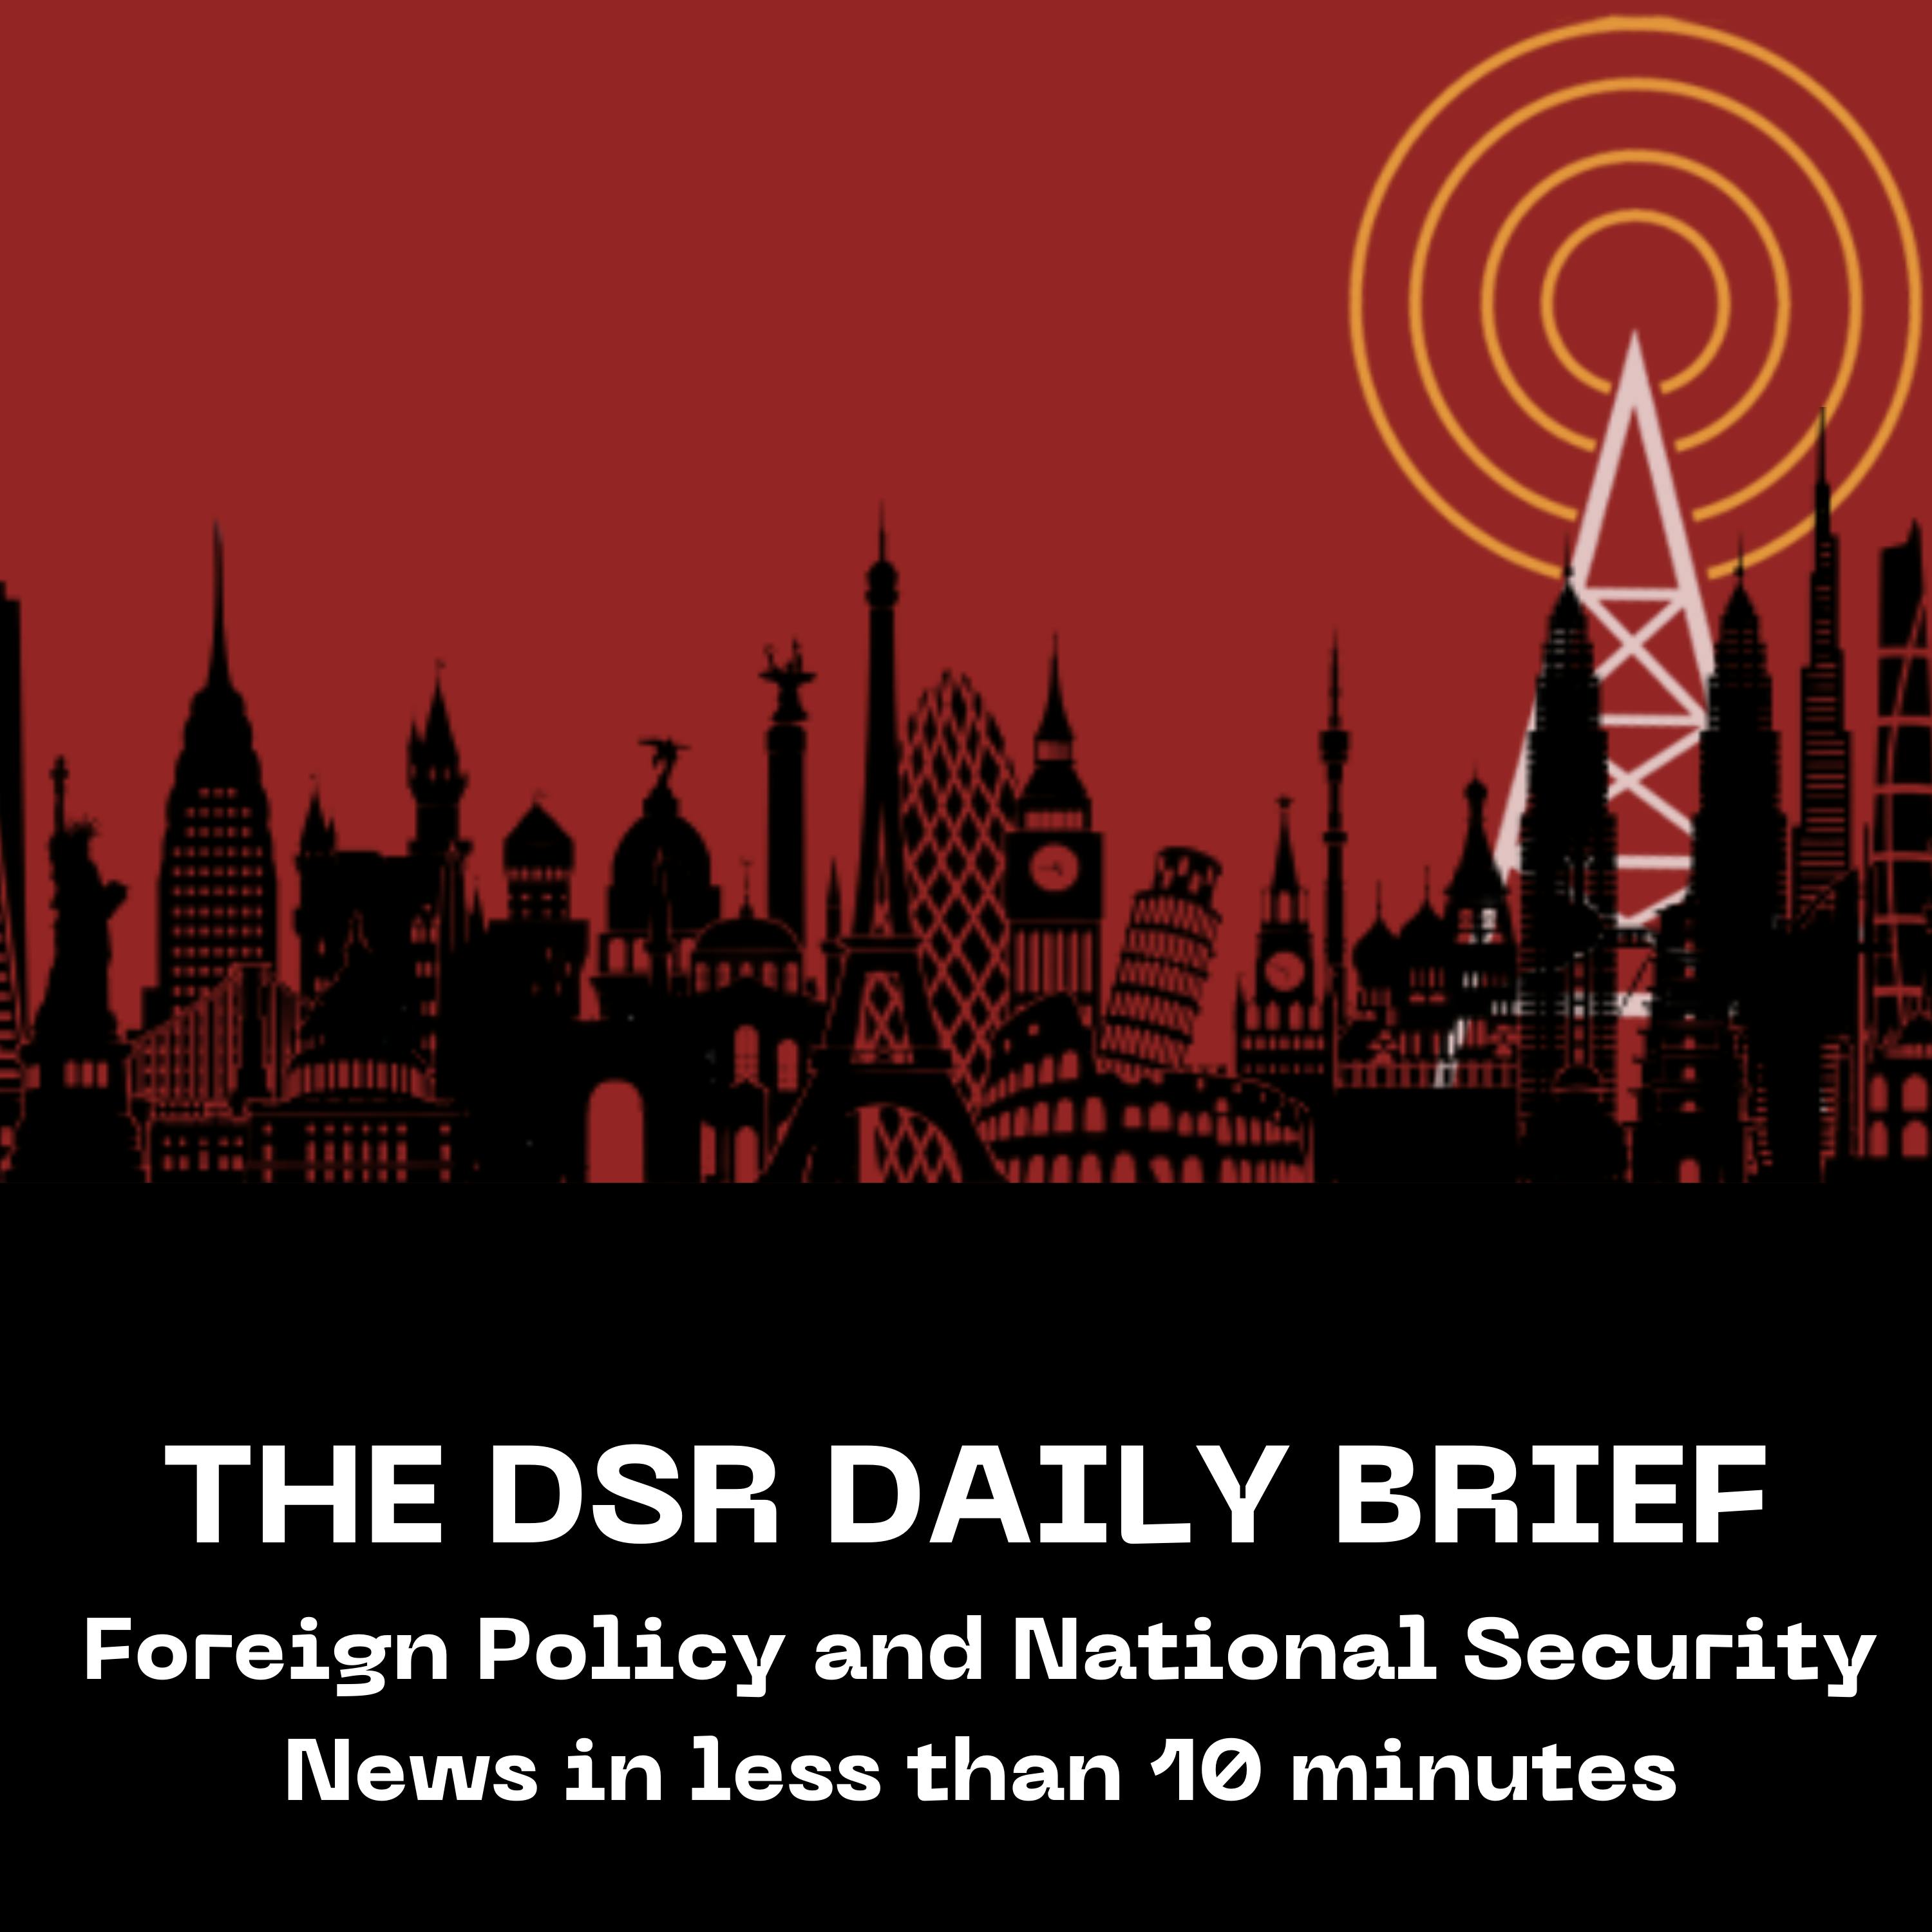 The DSR Daily for April 26: Weinstein Conviction Overturned in NY, Supreme Court Closes in on Decision on Trump Immunity